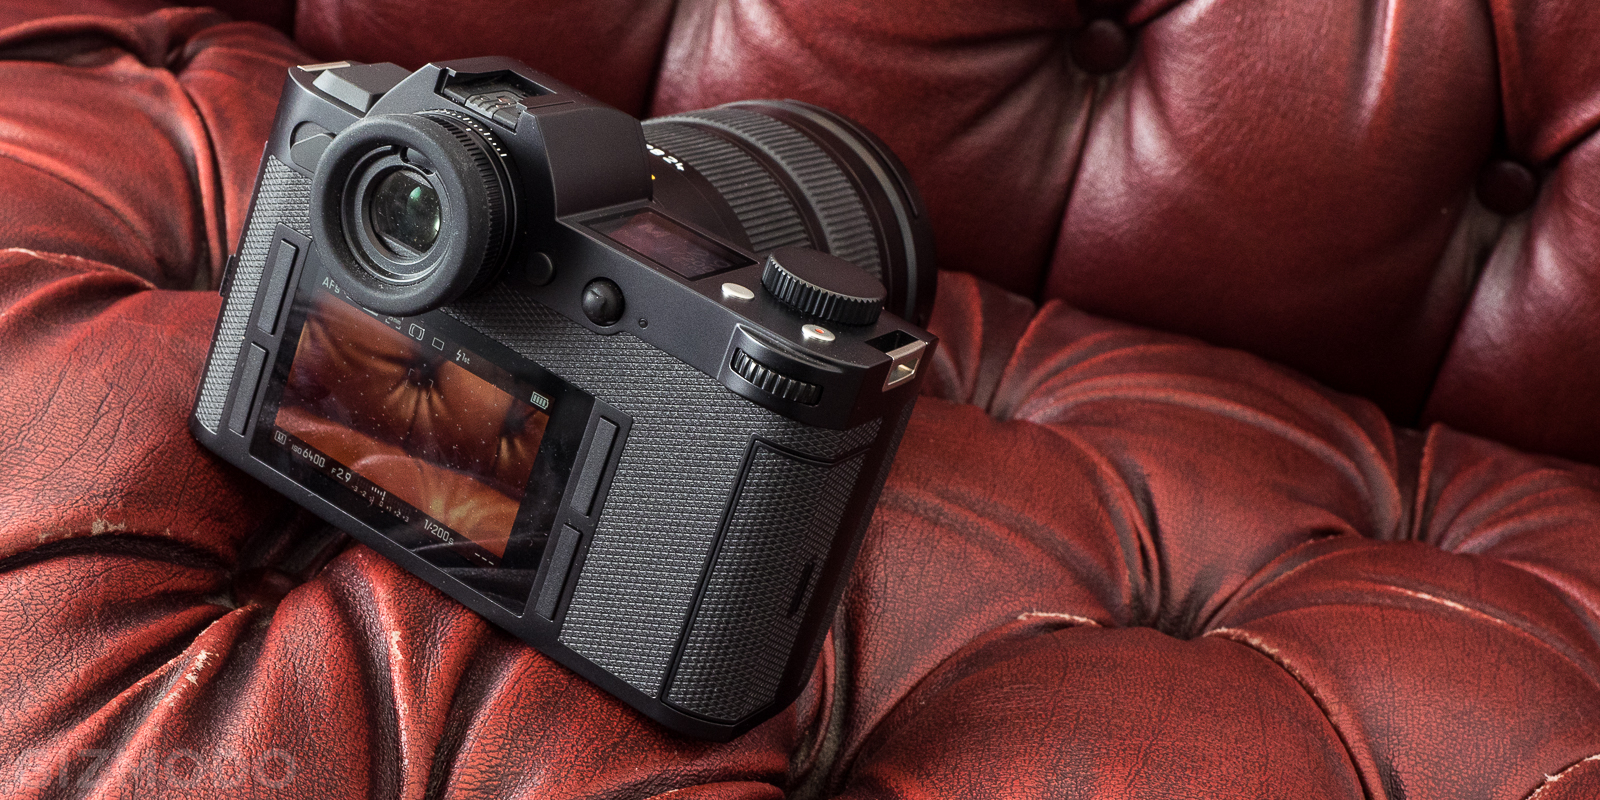 Hands On With Leica’s Brilliant But Back-Breaking Mirrorless Camera